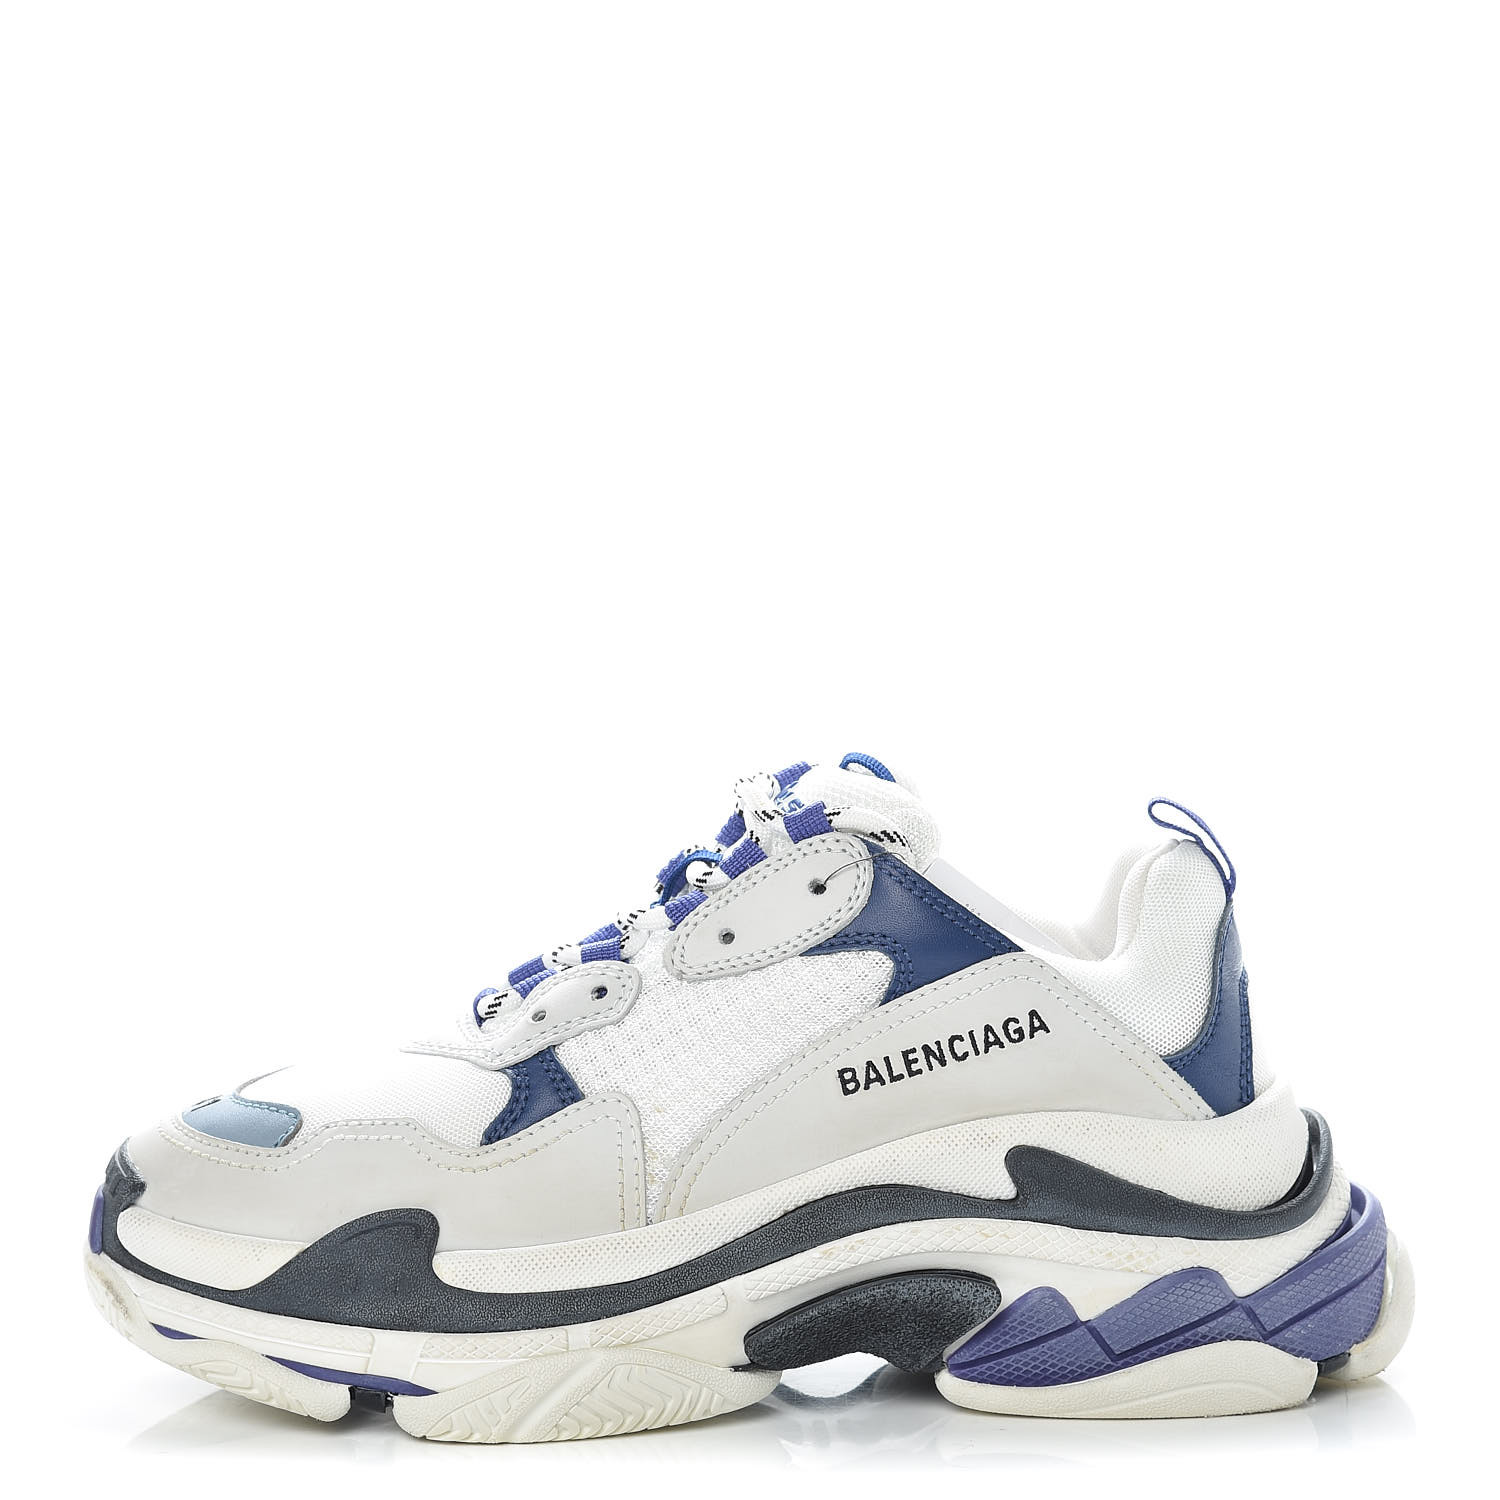 StockX Live Feed on Twitter Lowest Ask $597 Balenciaga Triple S